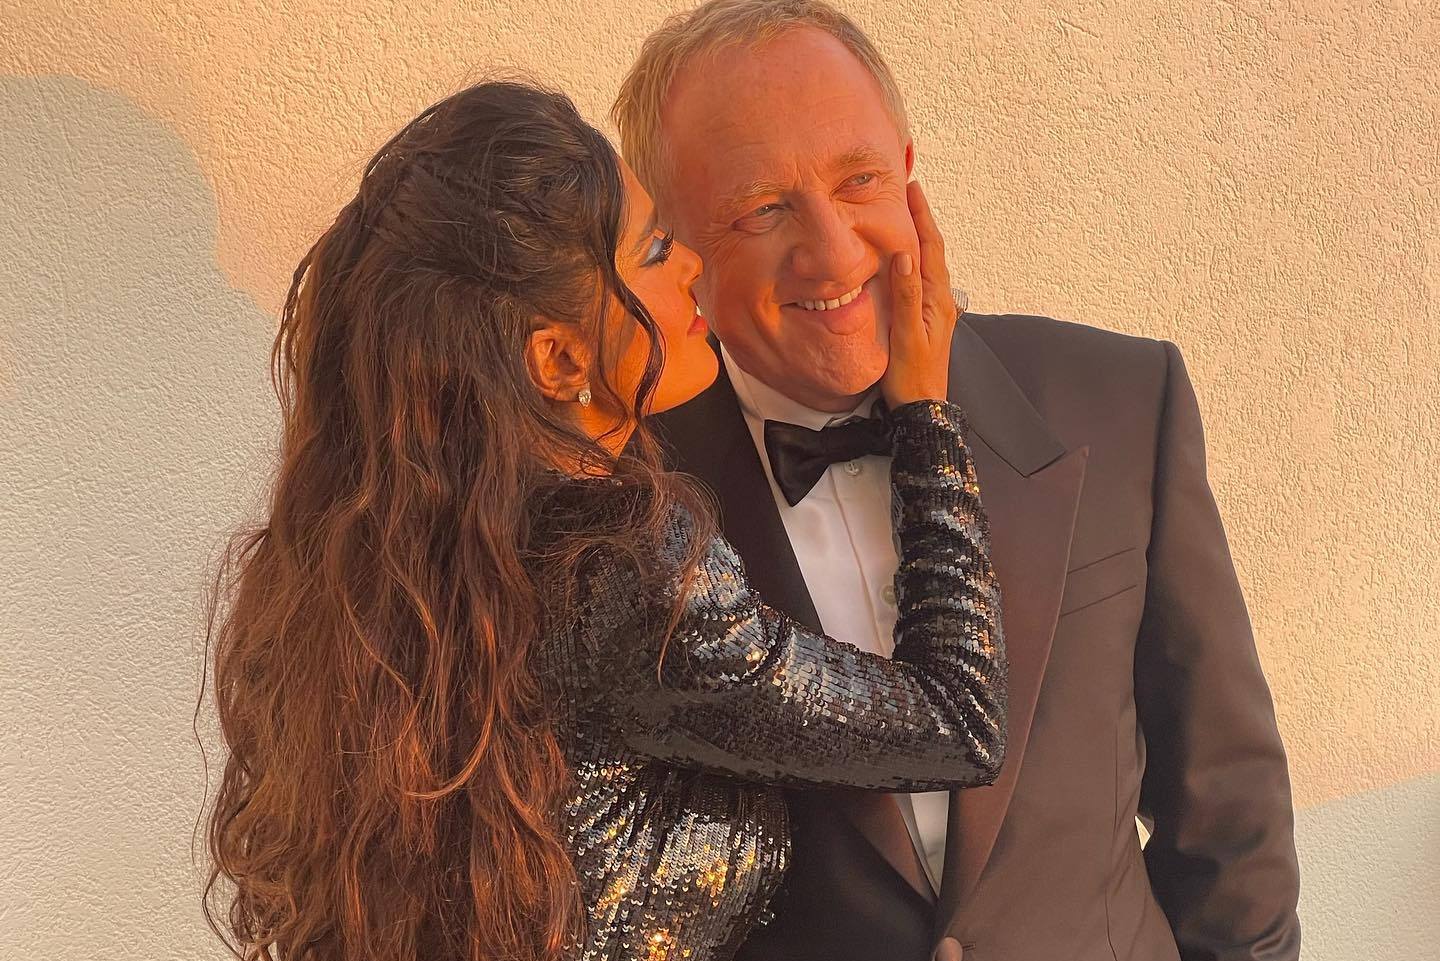 Photo by Salma Hayek Pinault on May 28 2023. May be an image of 2 people dinner jacket and